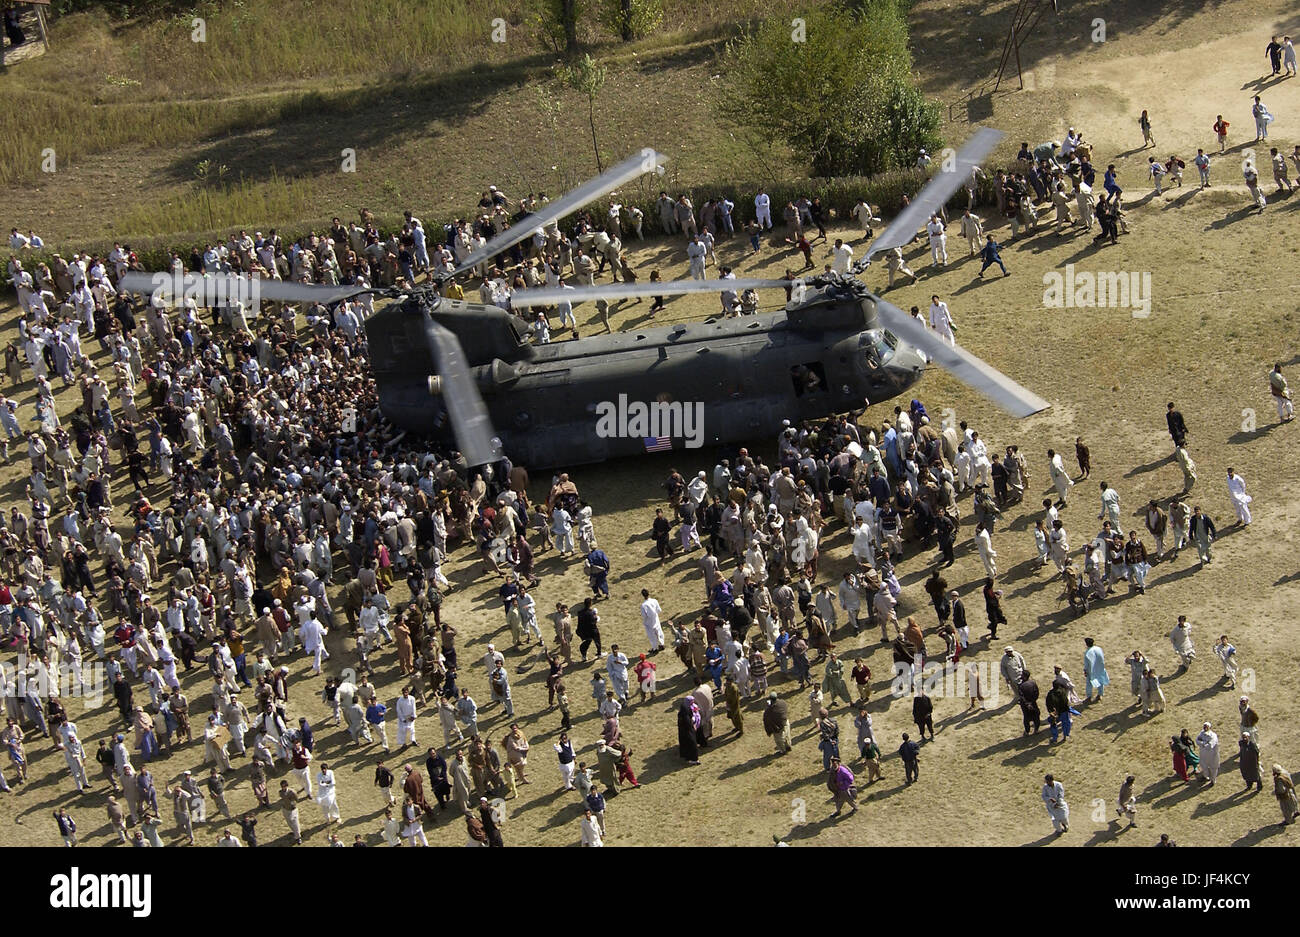 051017-F-9085B-005  Pakistani earthquake victims crowd around a U.S. Army CH-47 Chinook helicopter delivering disaster relief supplies to the earthquake devastated area surrounding the town of Oghi, Pakistan, on Oct. 17, 2005.  The Department of Defense is participating in the multinational effort to provide humanitarian assistance and support to Pakistan and parts of India and Afghanistan following a devastating earthquake.  DoD photo by Tech. Sgt. Mike Buytas, U.S. Air Force.  (Released) Stock Photo